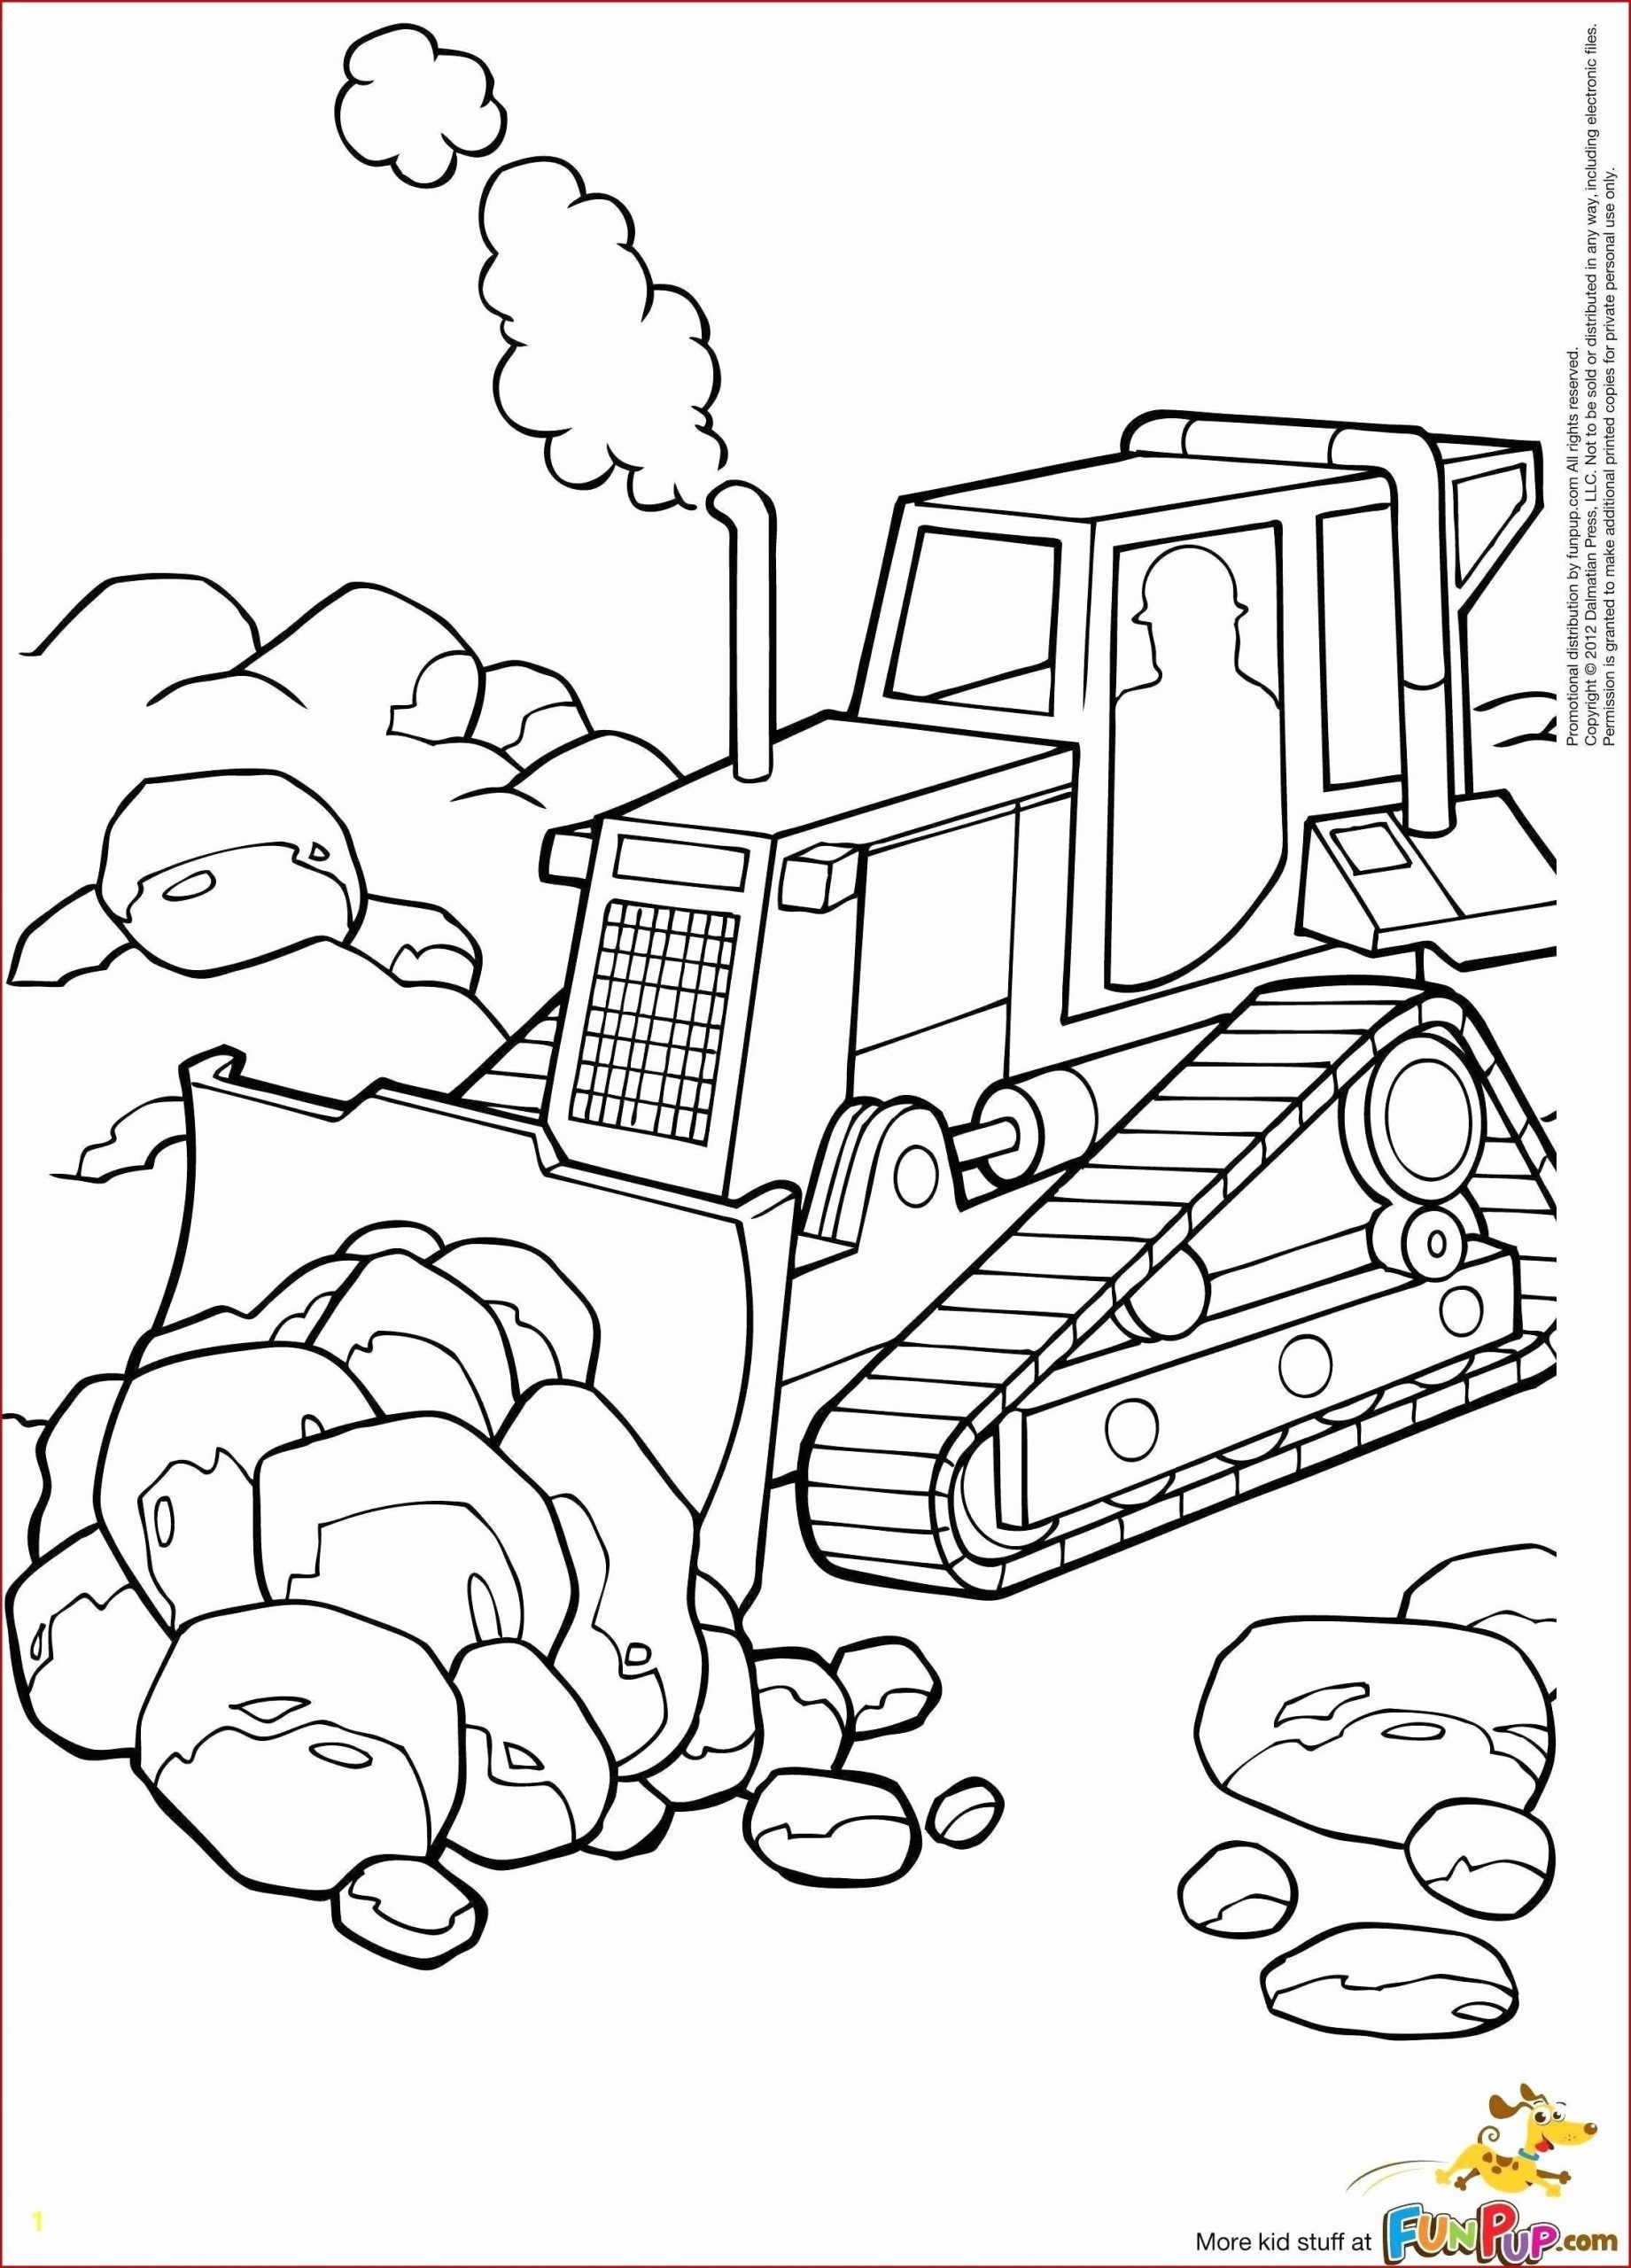 Construction Site Coloring Pages - Coloring Home